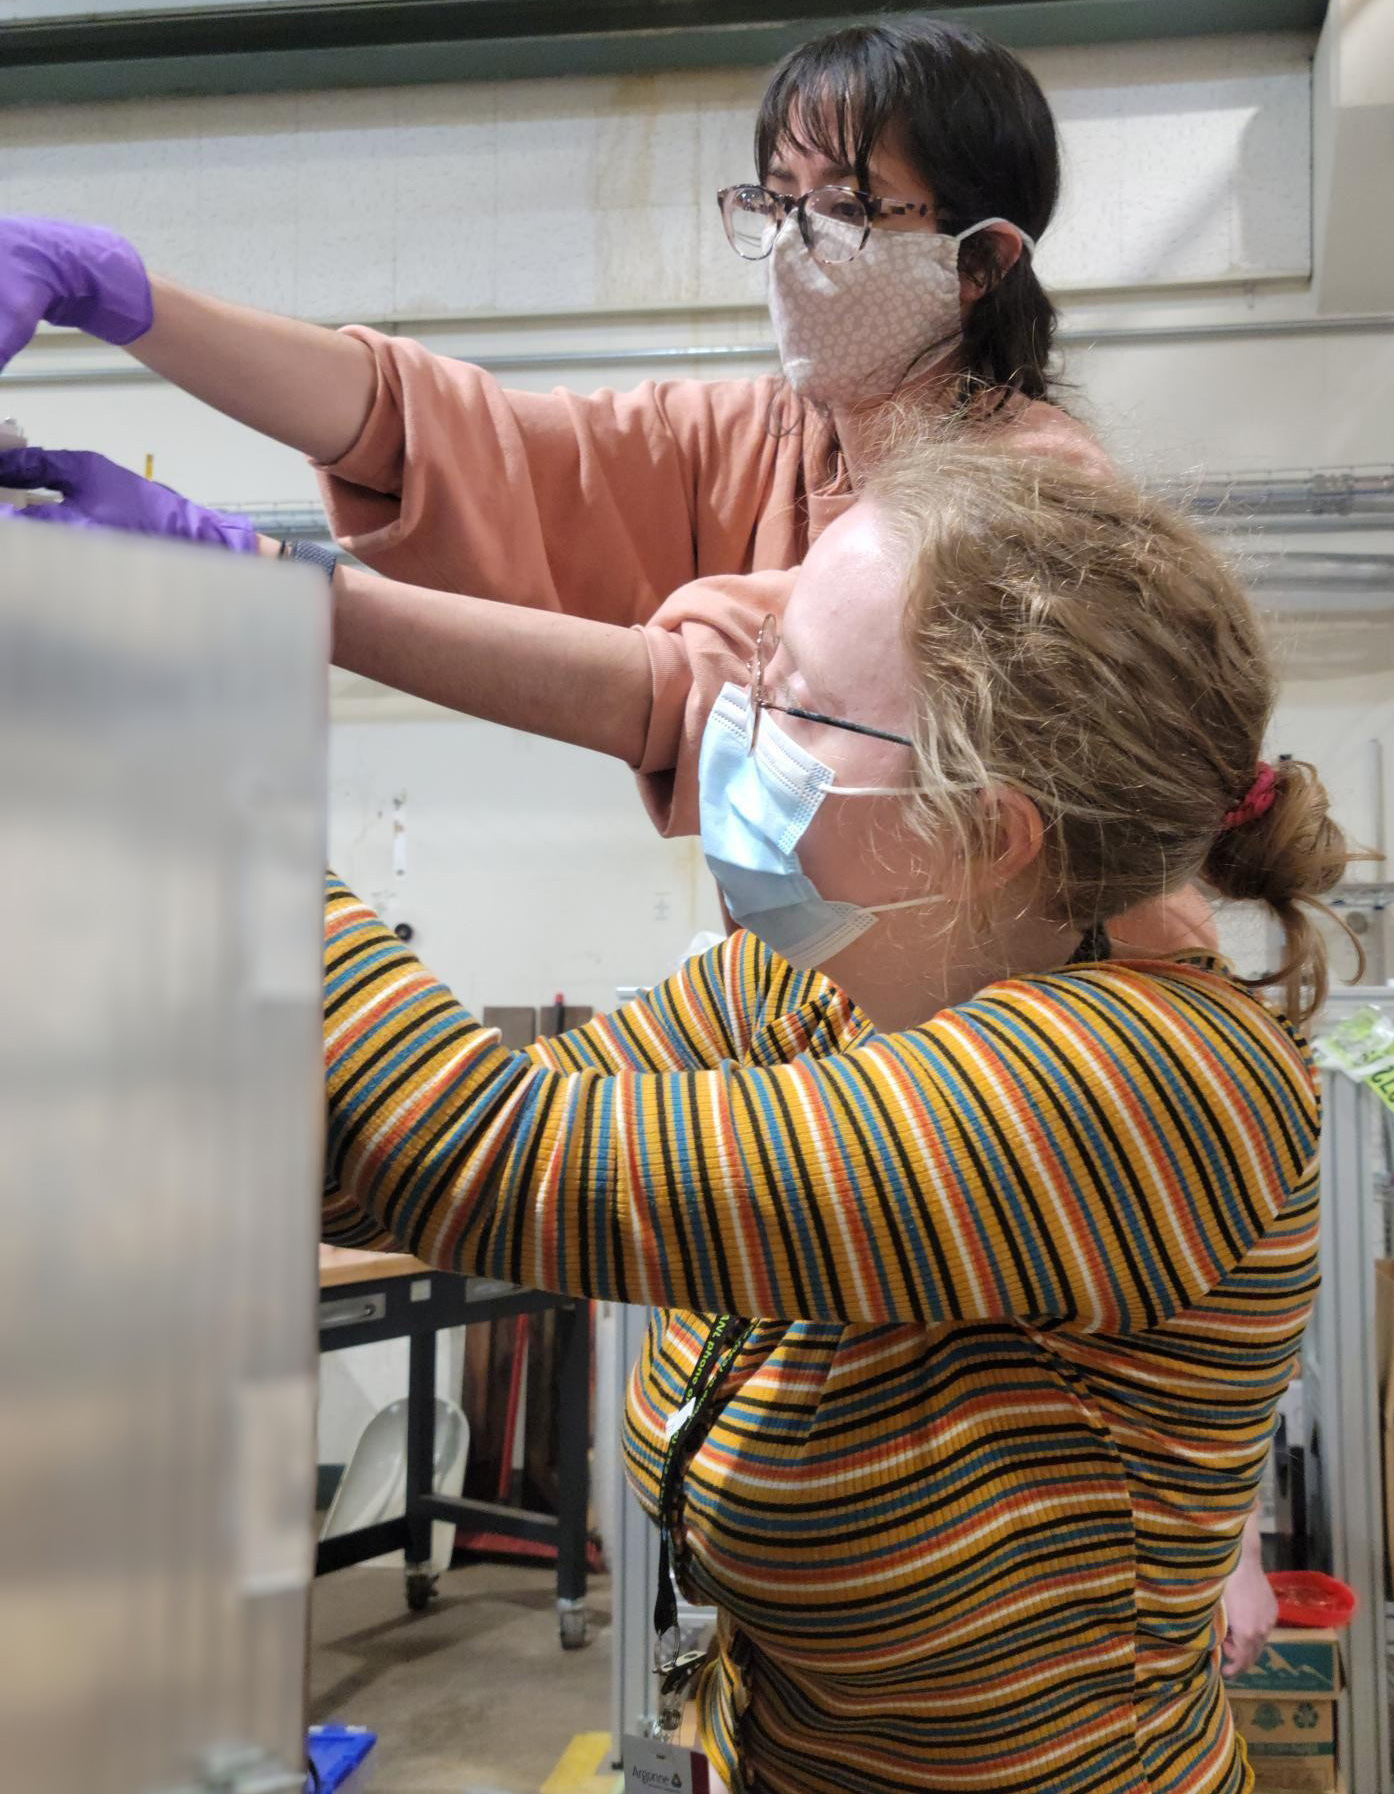 Hannah Berg (front) and lab mate Caley Harris (back) work on detector instrument at Argonne National Laboratory.